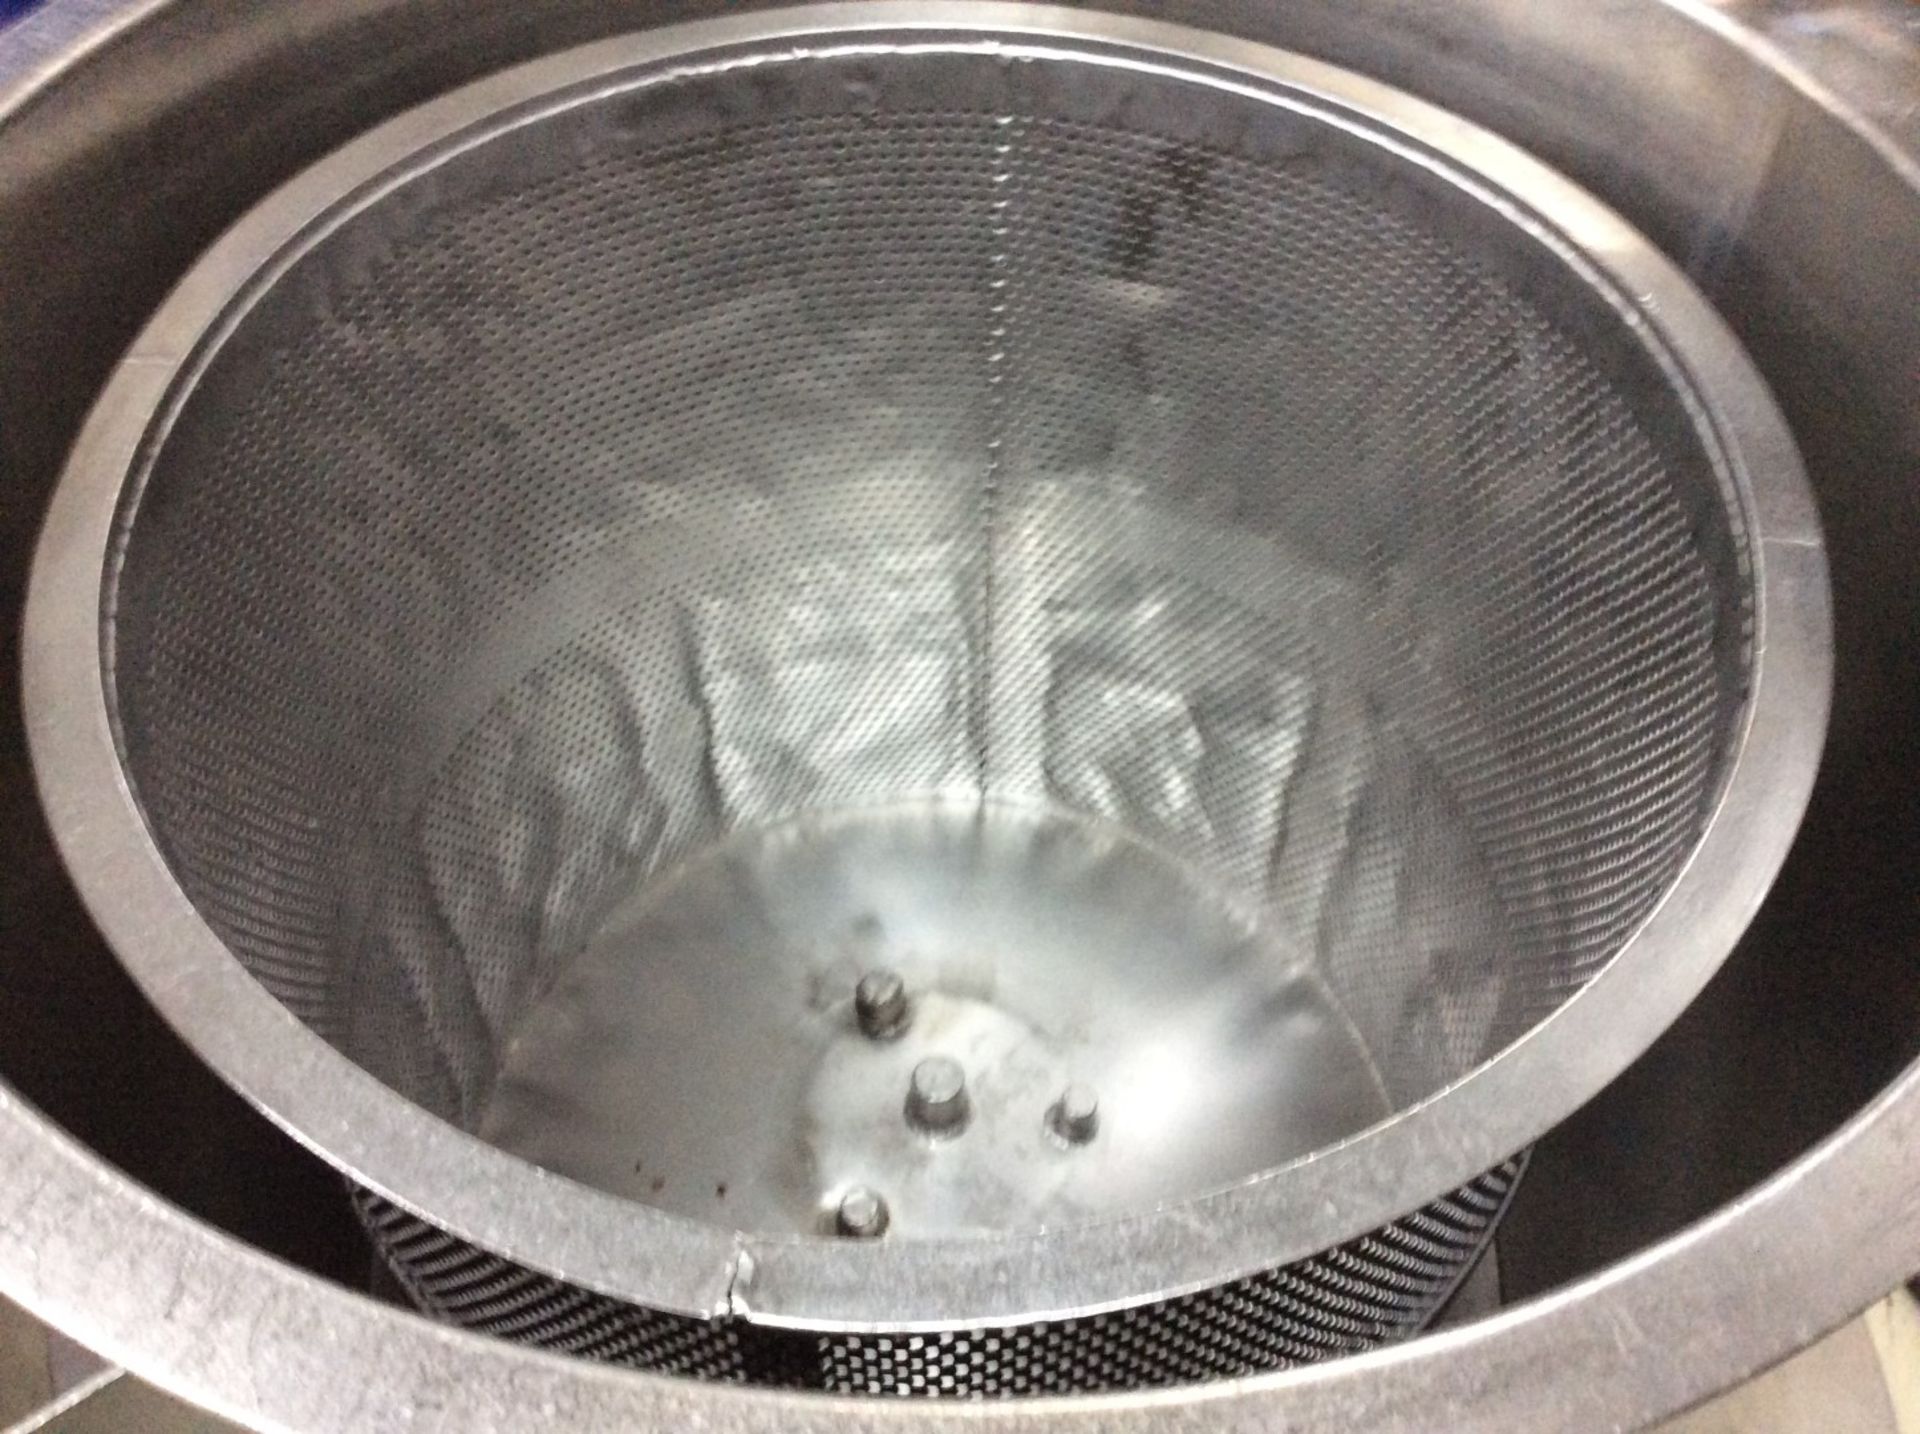 Centrifugal Spin Dryer - Image 4 of 5